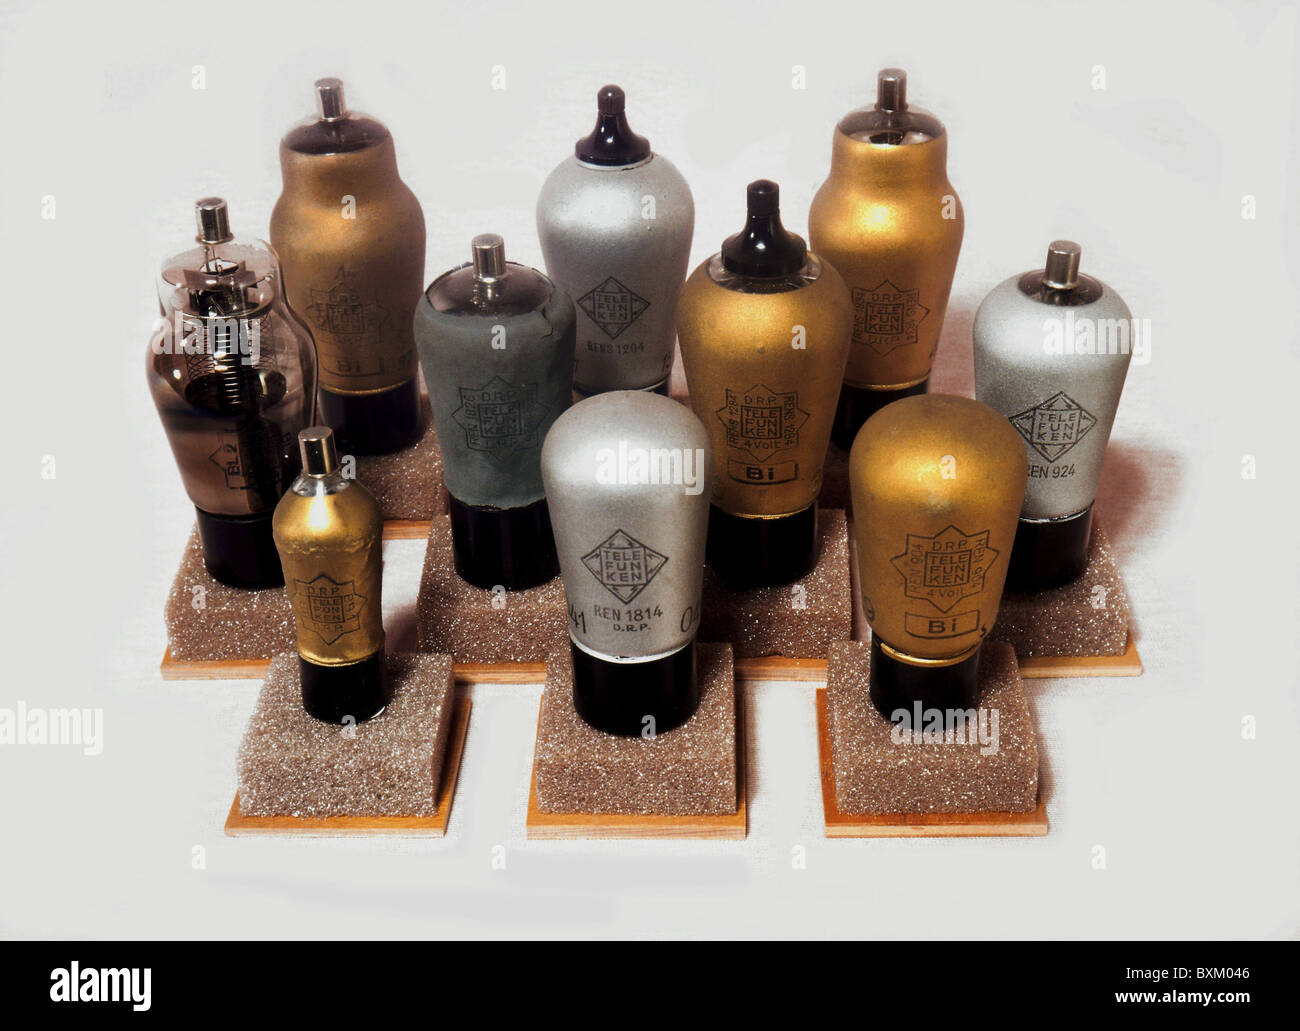 broadcast, radio, radio valves Telefunken, Germany, 1934, 1930s, 30s, 20th century, historic, historical, radio valve, valve, radio valves, valves, triode, triodes, tetrodes and pentodes, REN- und RENS series, ACH 1, German Reich patent, technics, engineering, technology, technologies, component, components, Additional-Rights-Clearences-Not Available Stock Photo